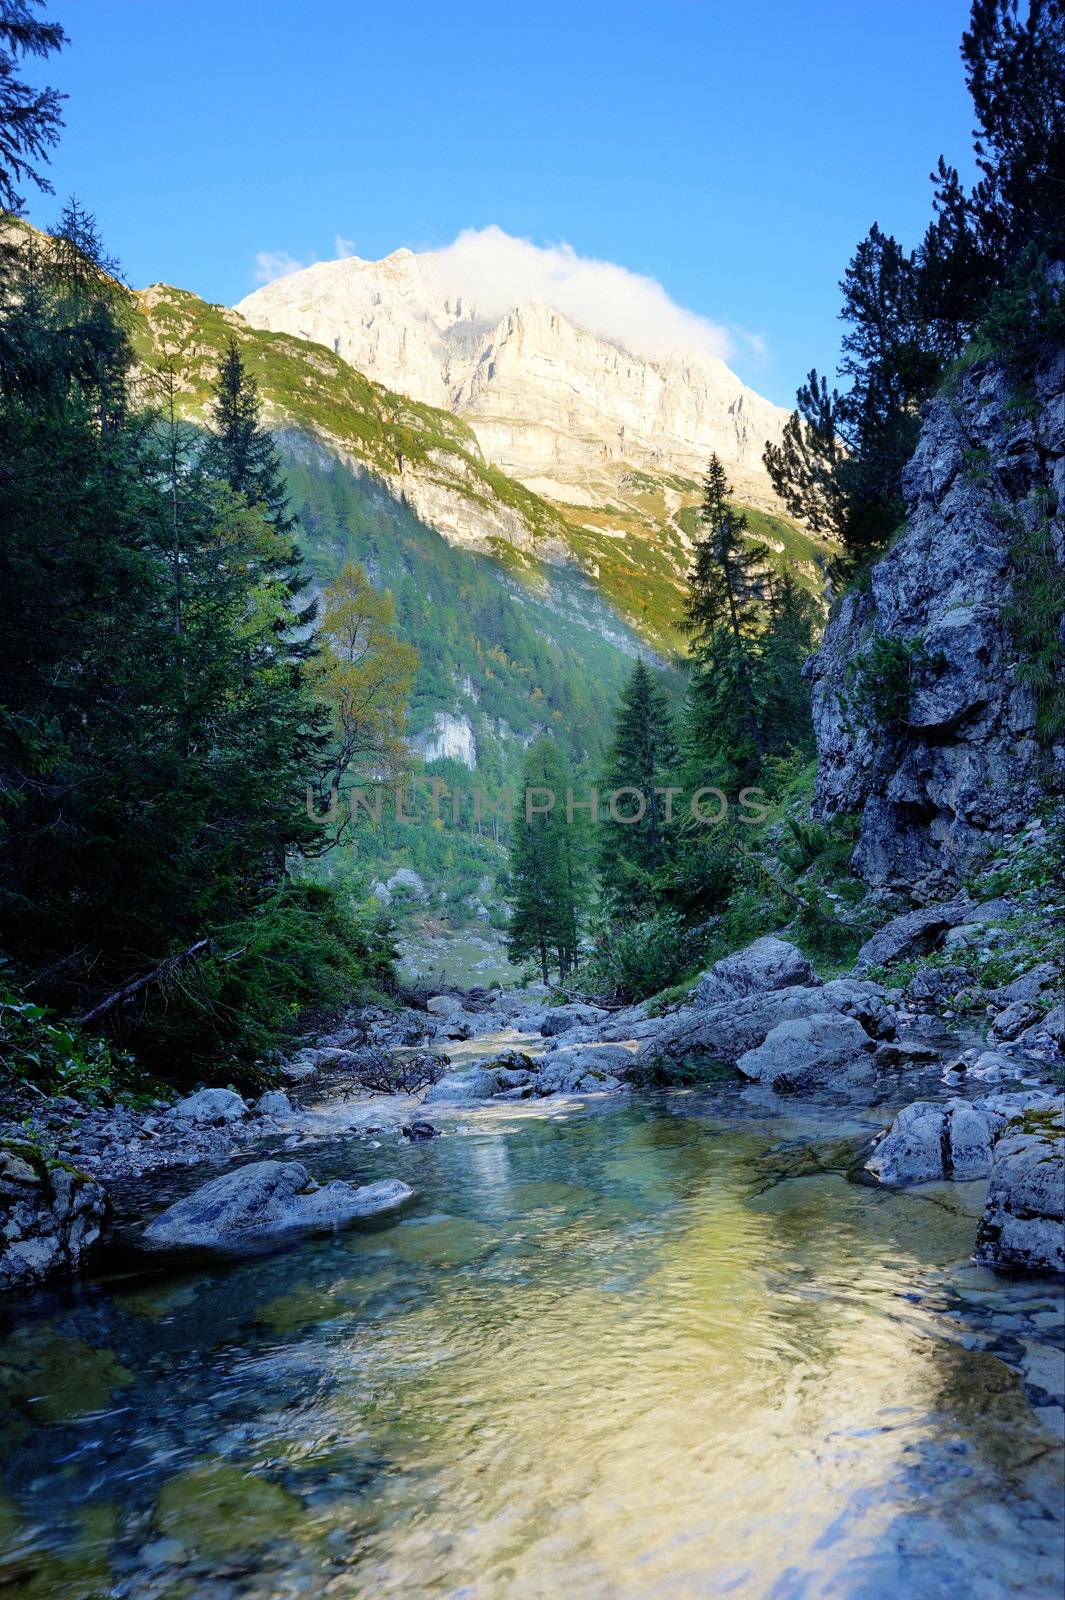 An image of majetic mountains and a river